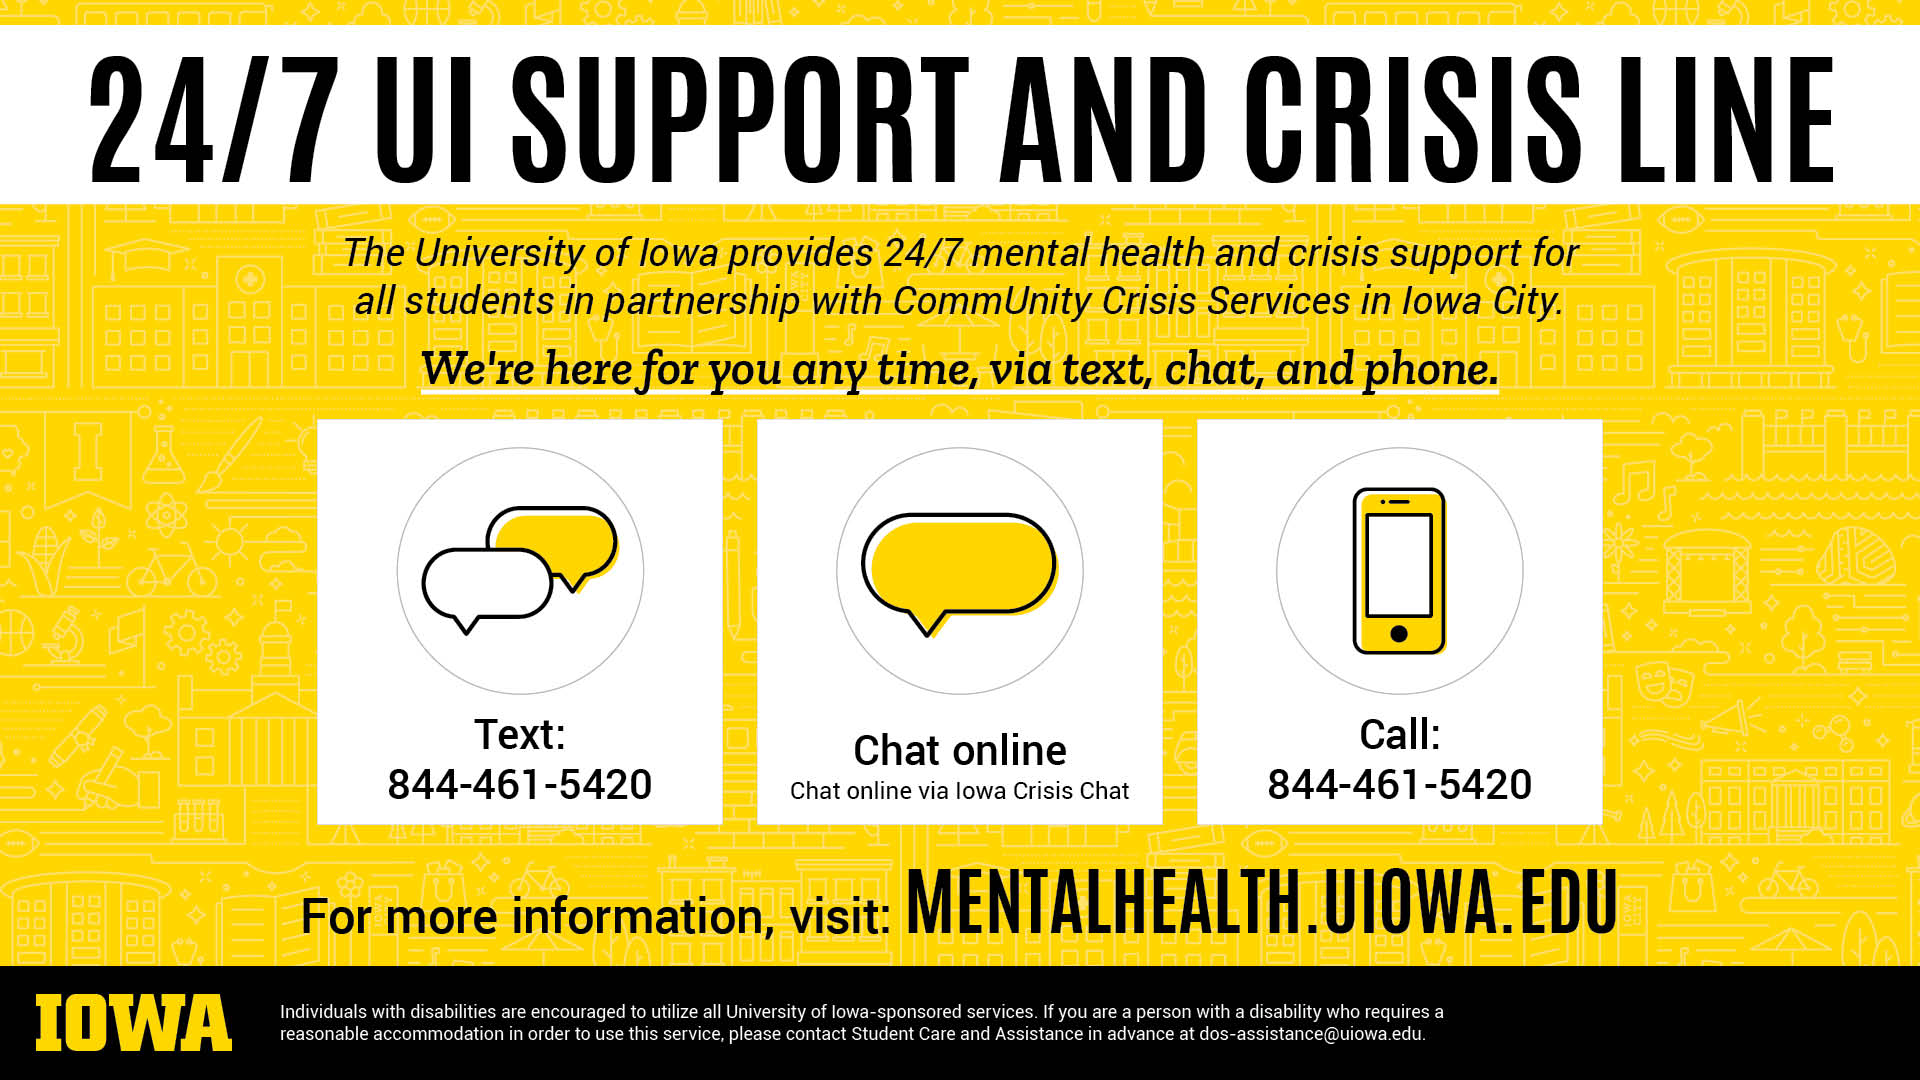 24/7 UI Support and Crisis Line. For more information, visit mentalhealth.uiowa.edu